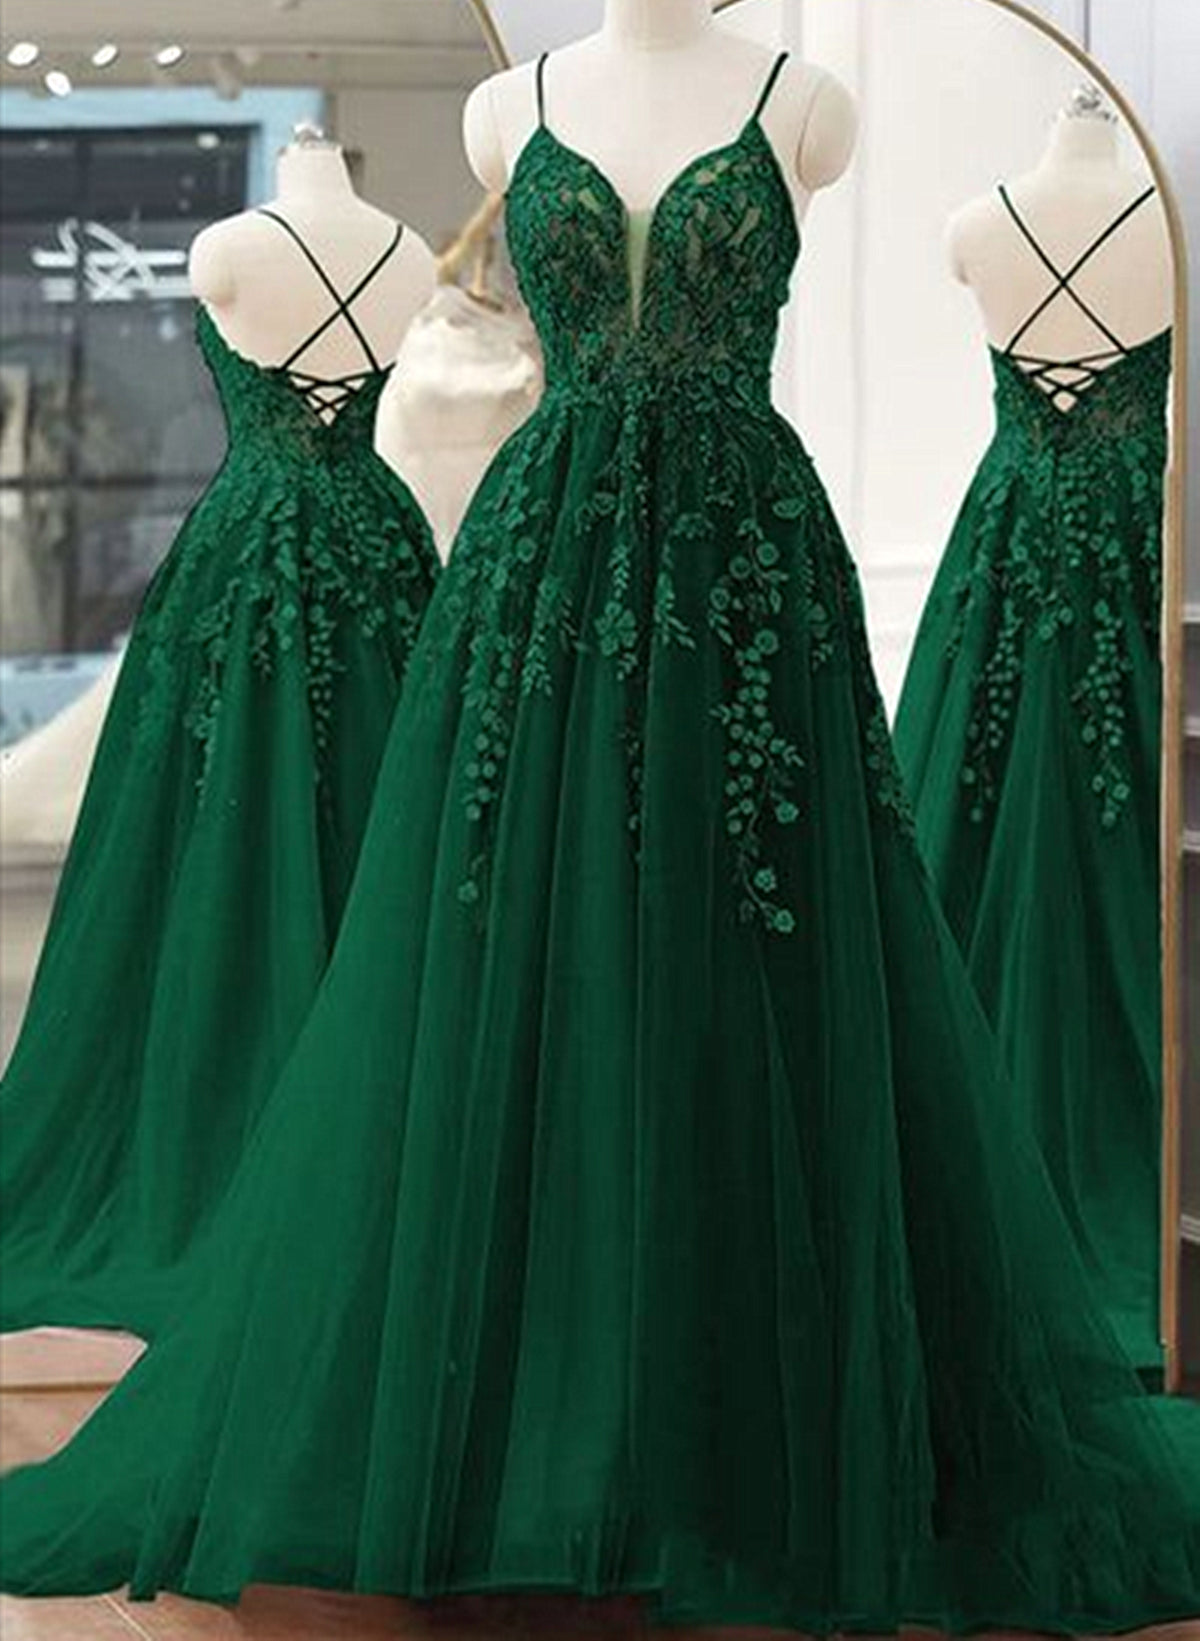 Bridesmaid Dresses Sleeveless, Dark Green A-line V-neckline Tulle and Lace Party Dress, Green Long Prom Dress